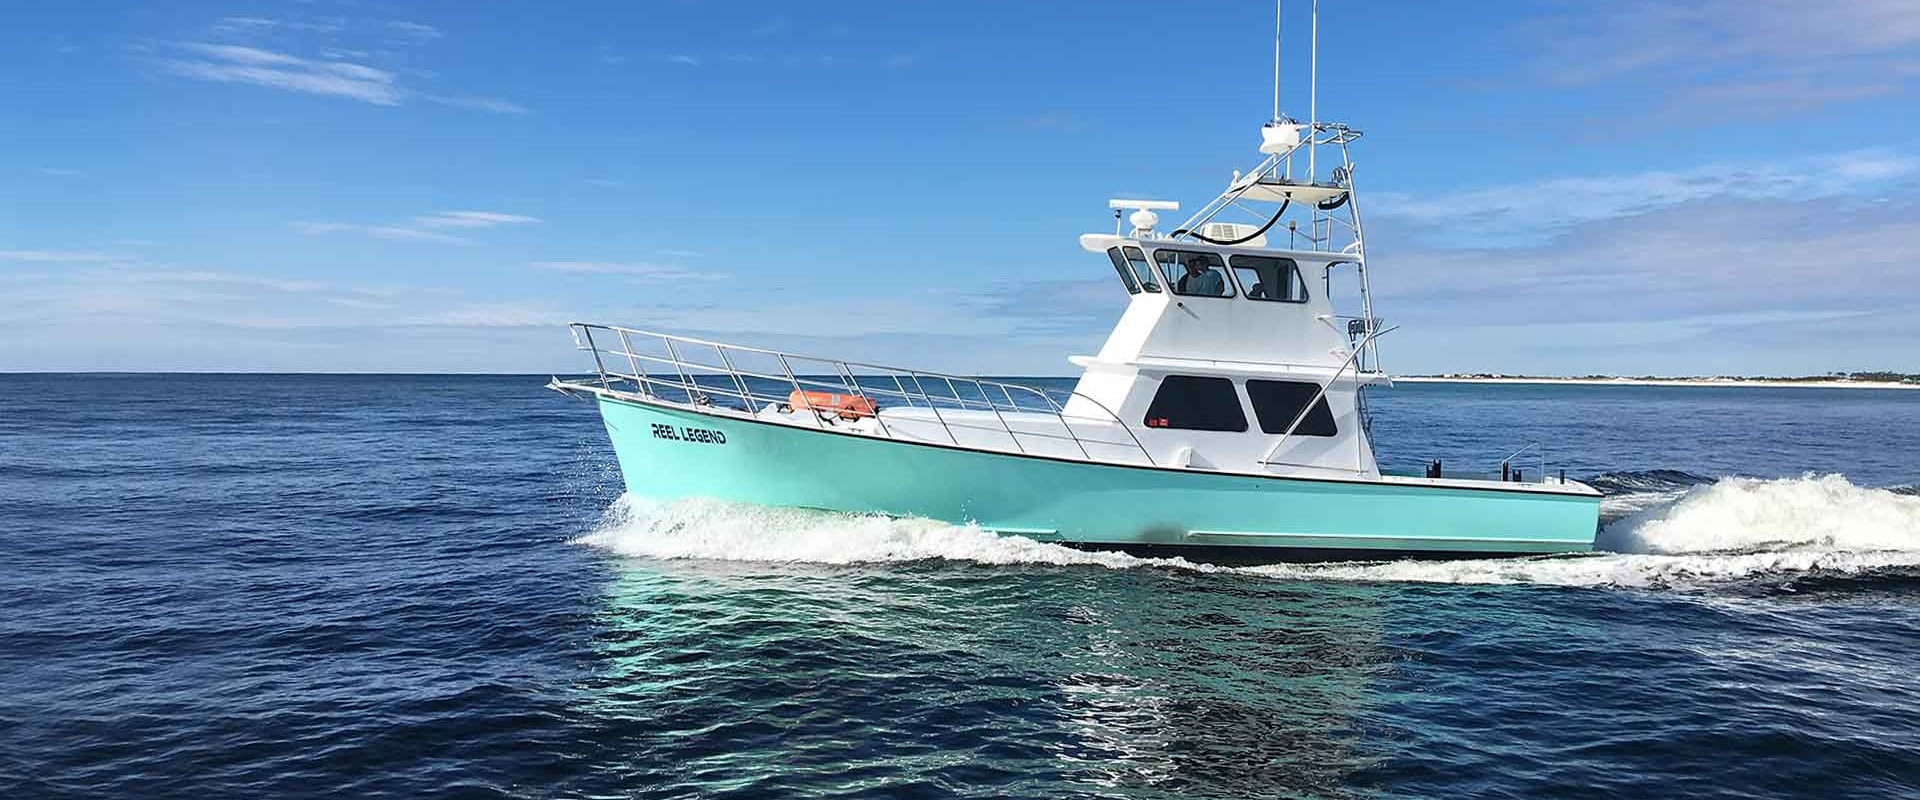 How Much Does a Florida Fishing Charter Cost?